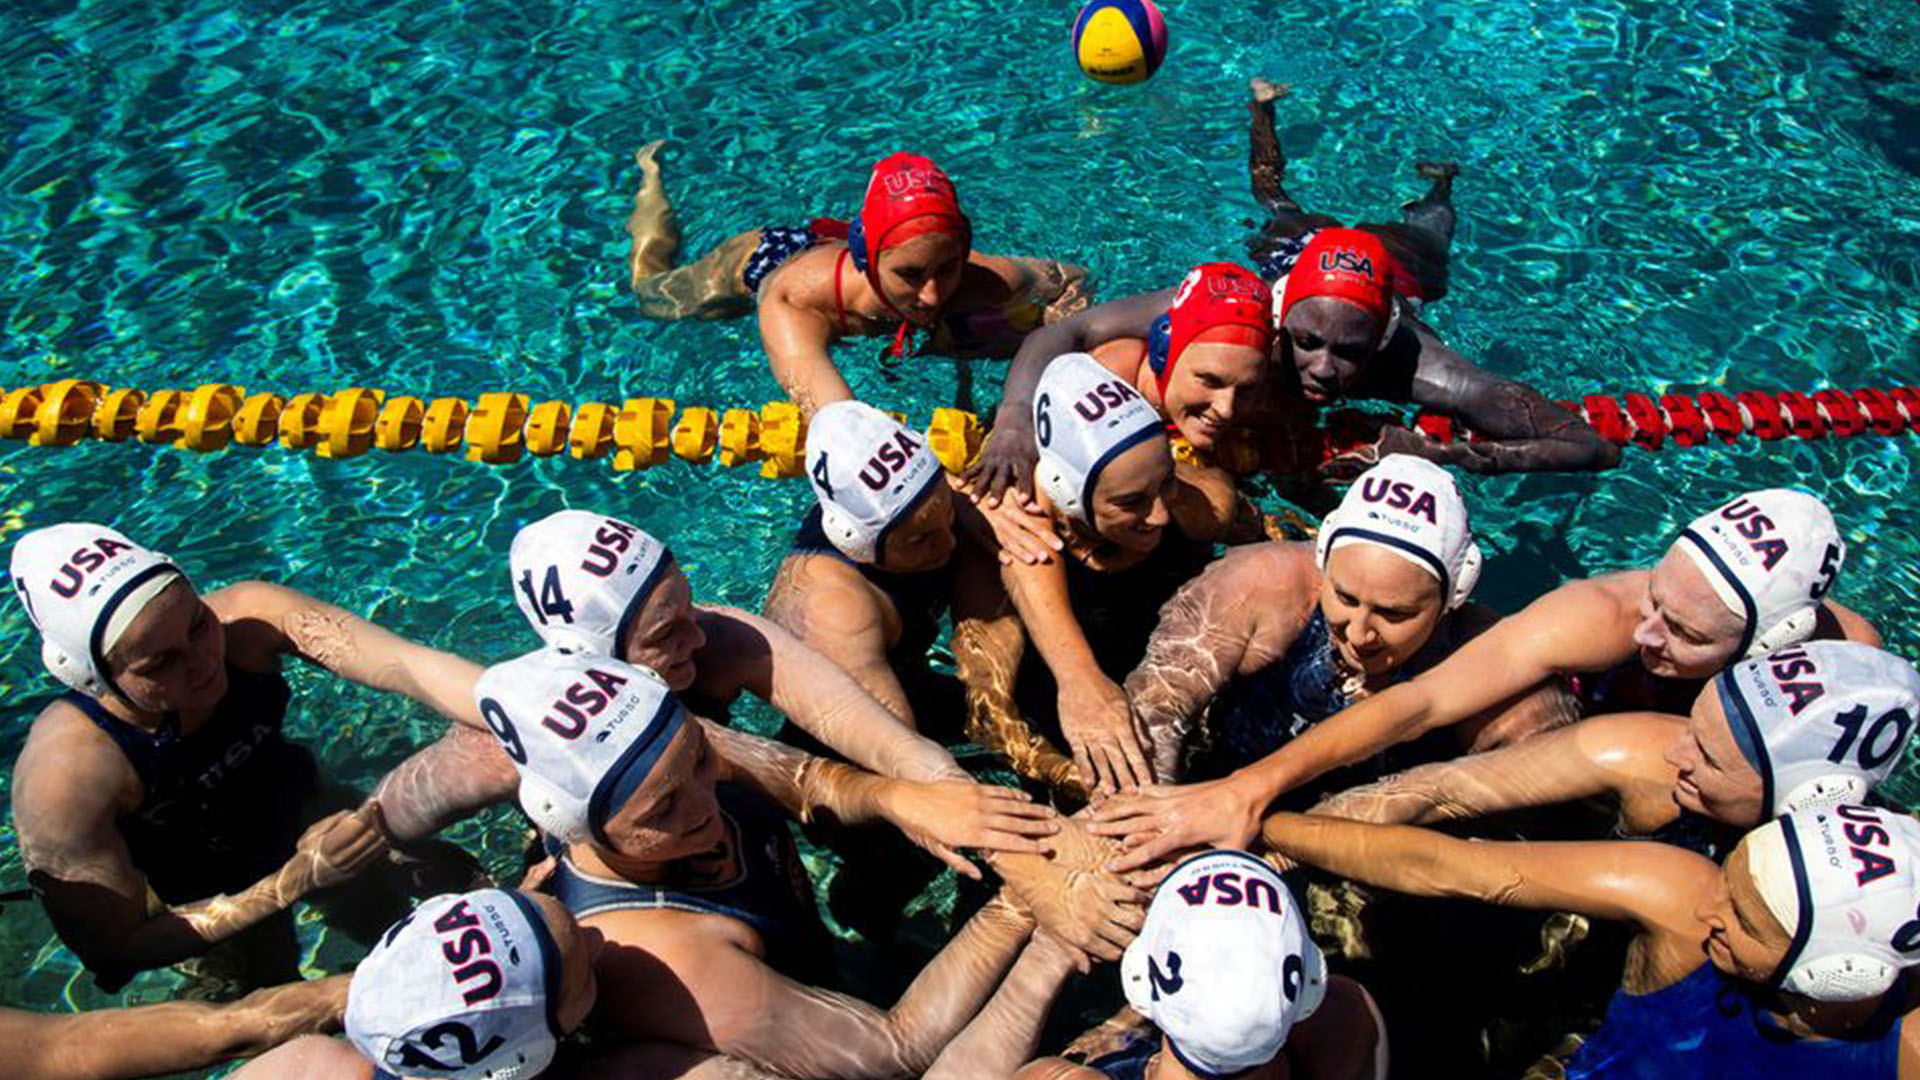  Members of the U.S. Women's Water Polo National team play a scrimmage against the National Hungarian team at a pool in Los Alamitos, California, U.S., May 27, 2021 ahead of the Tokyo Olympics. Reuters/ Aude Guerrucci